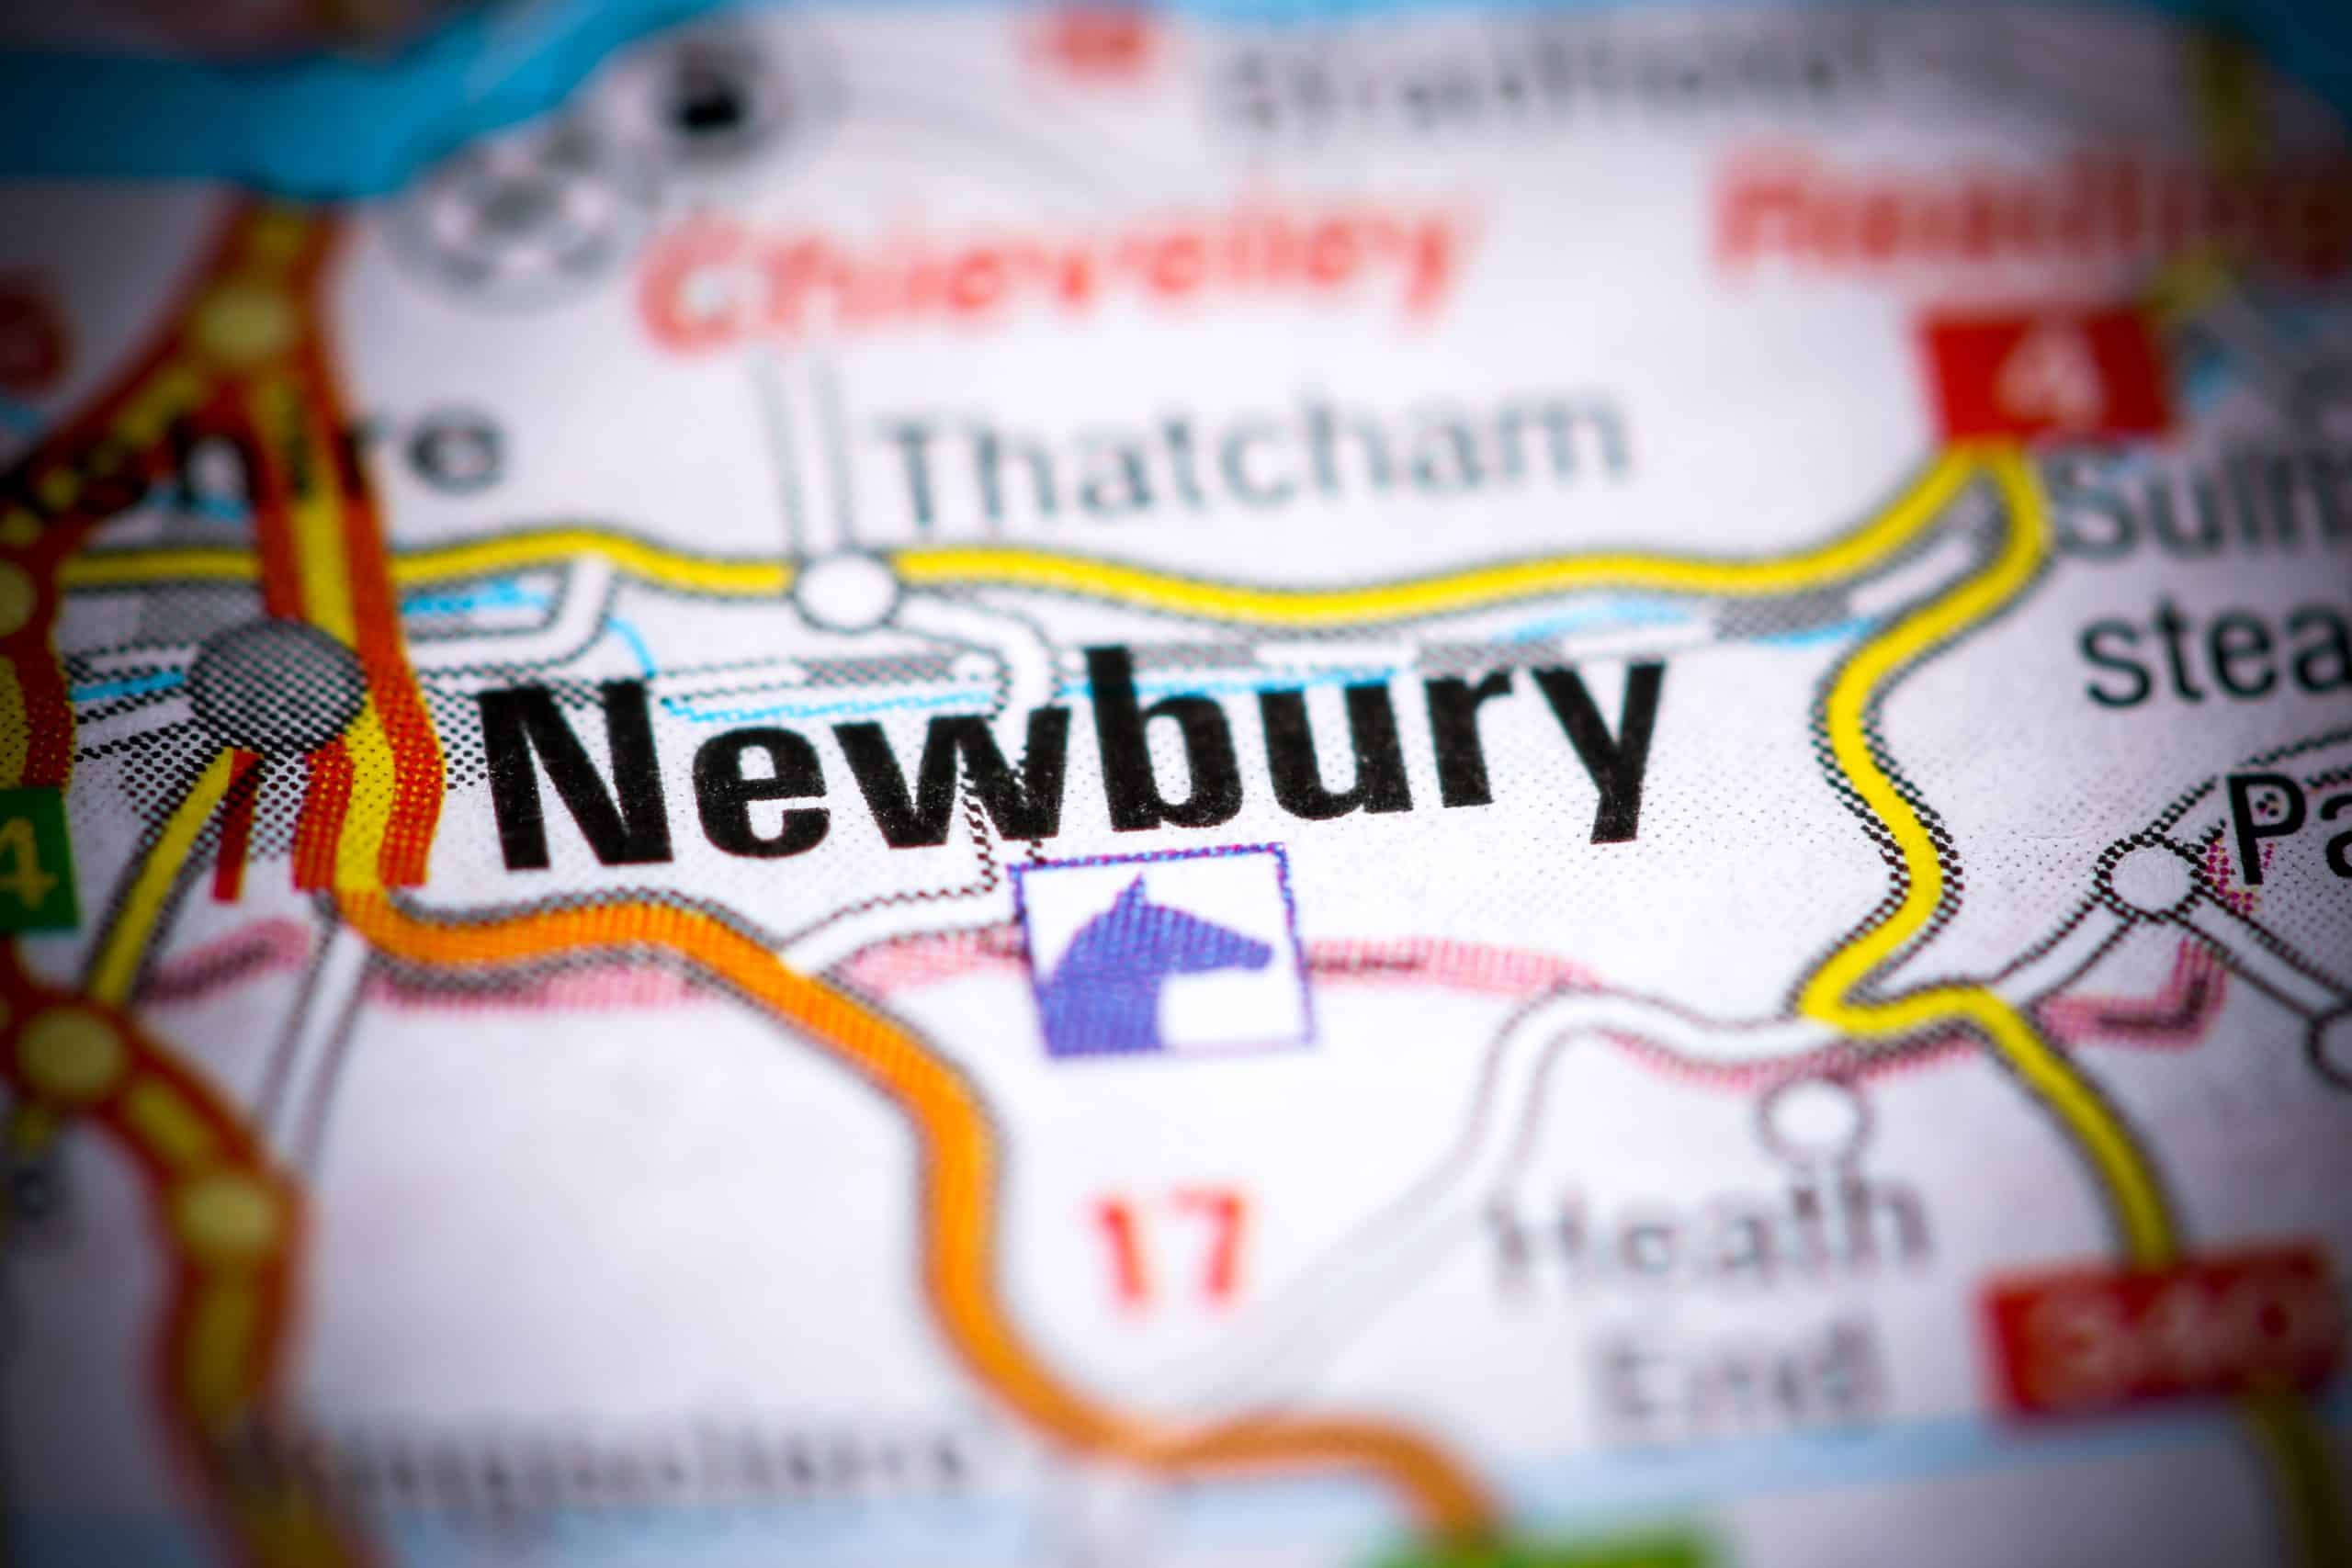 Moving to the historical market town of Newbury? Our Cinch Storage Newbury will be able to help. Image shows a map with Newbury in bold black writing and other surrounding towns.